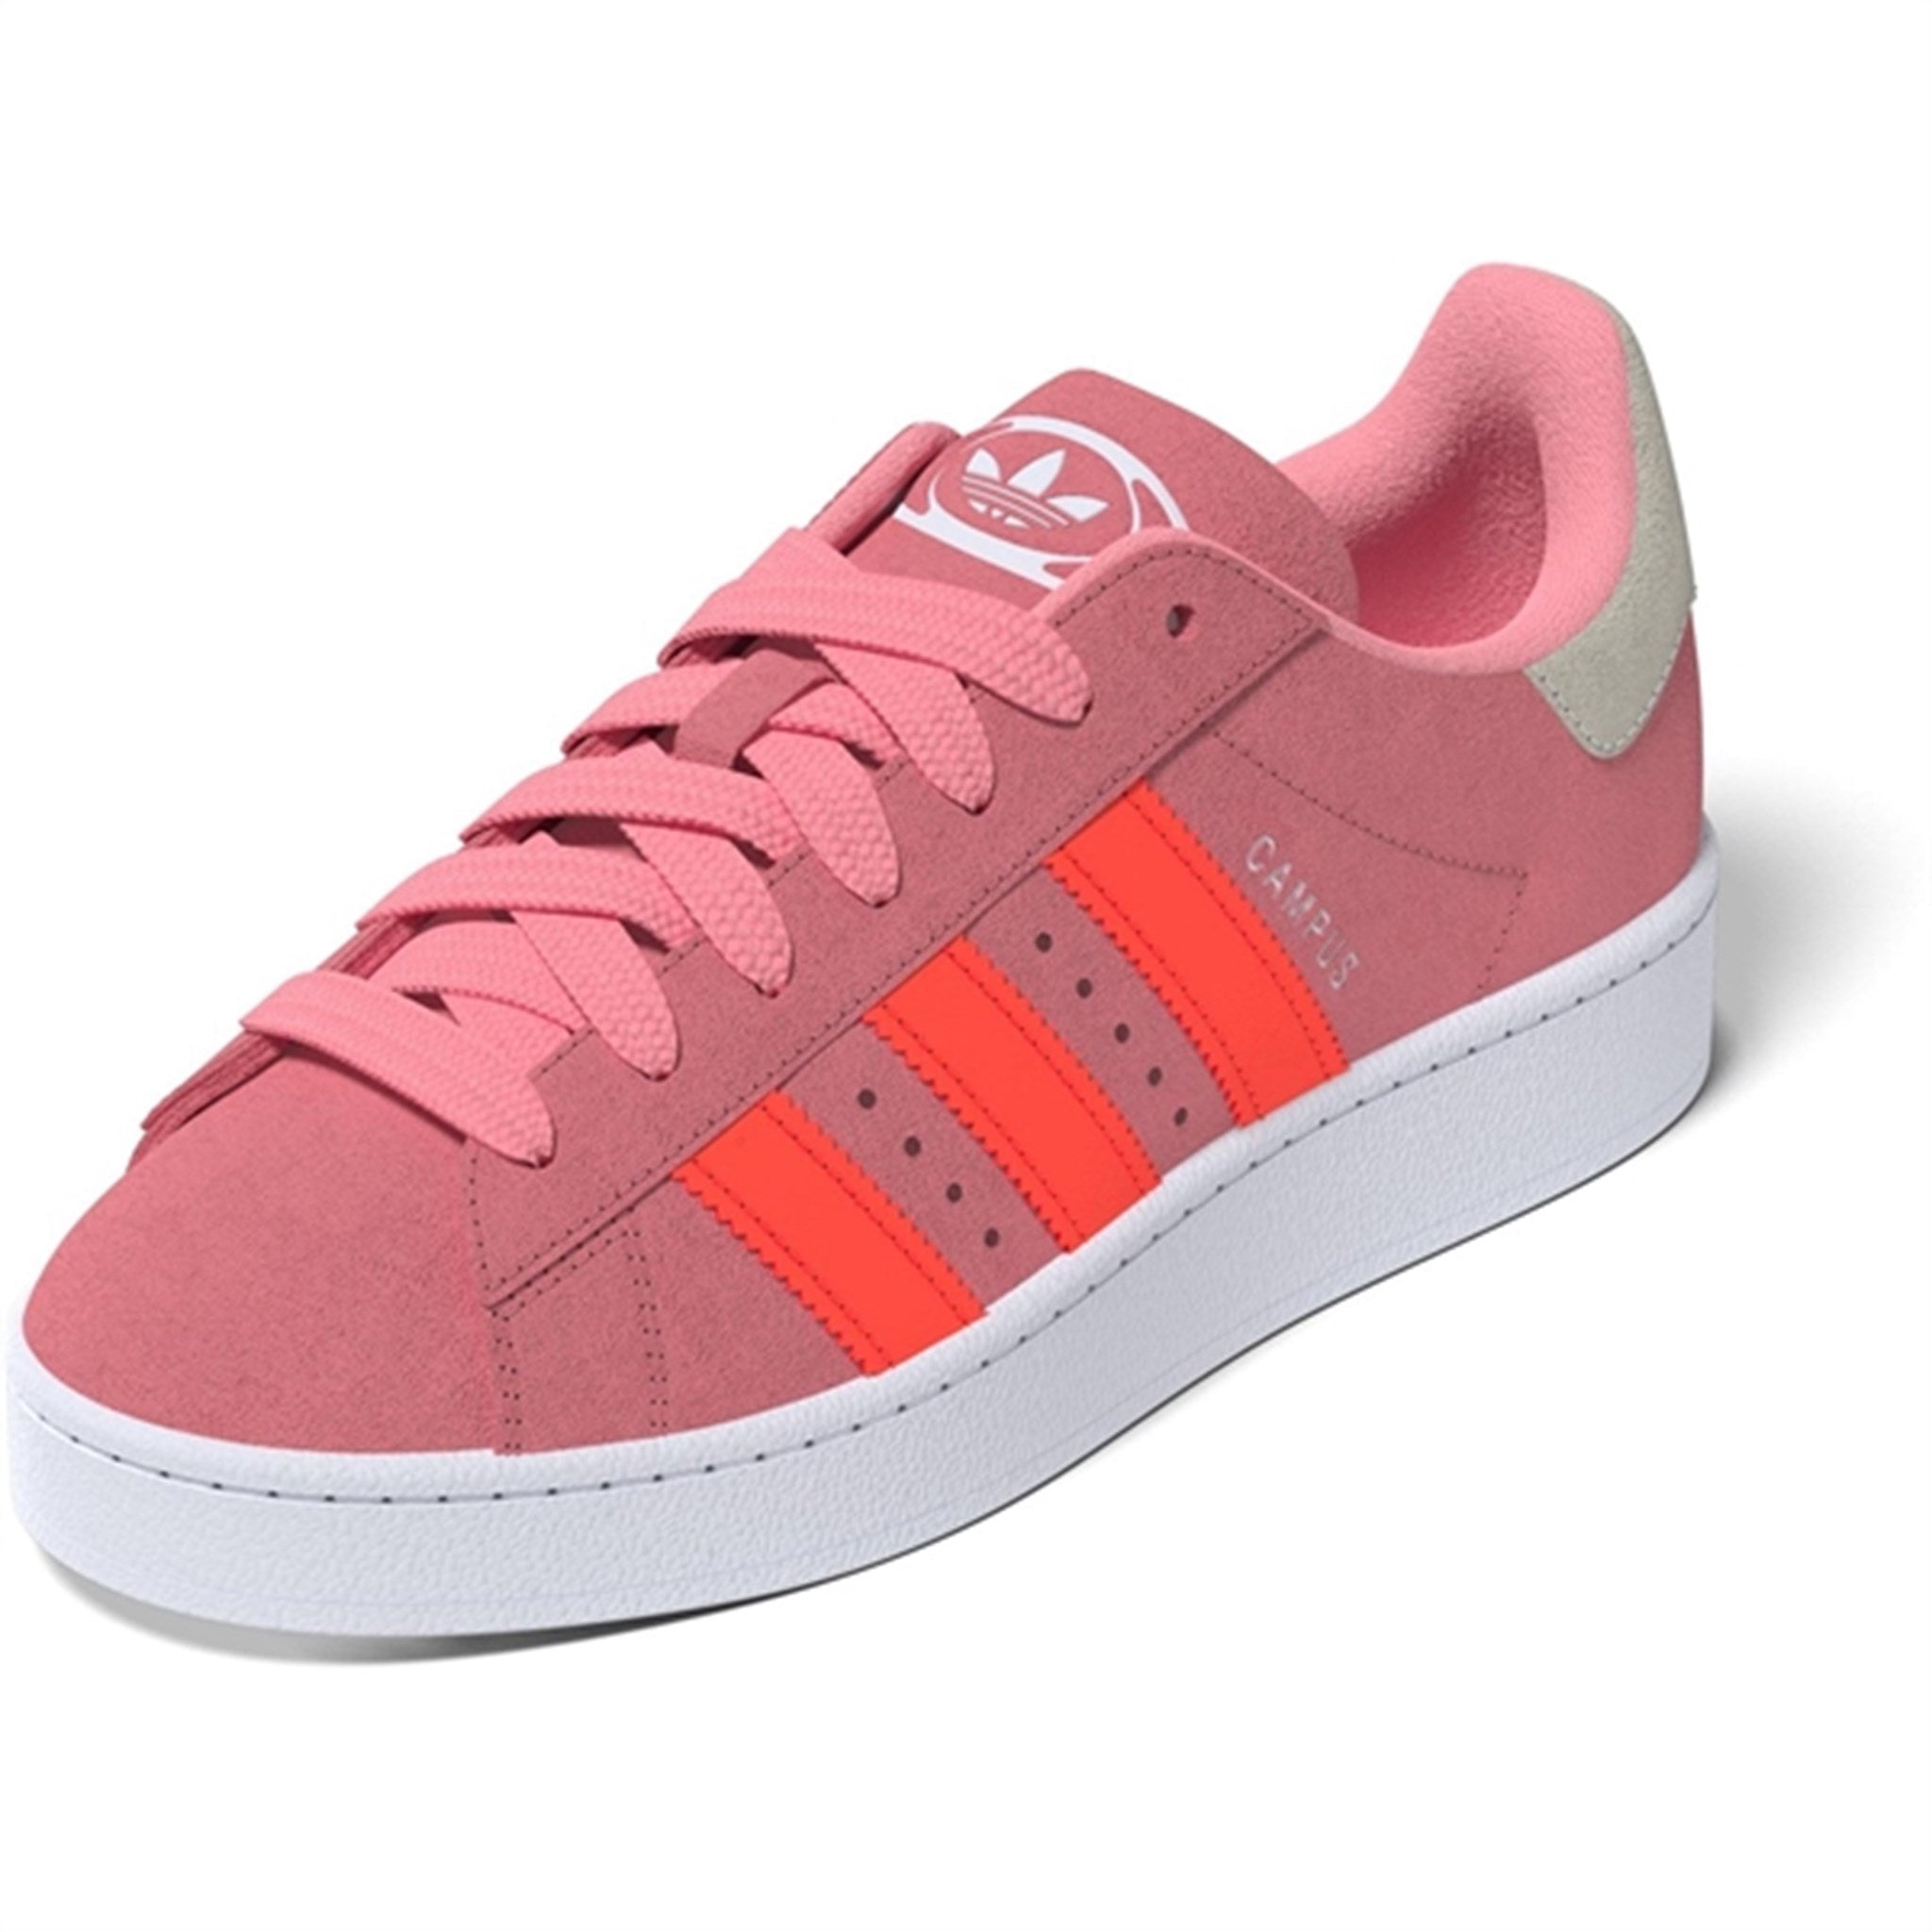 adidas Originals CAMPUS 00s J Sneakers Bliss Pink / Solar Red / Cloud White 6